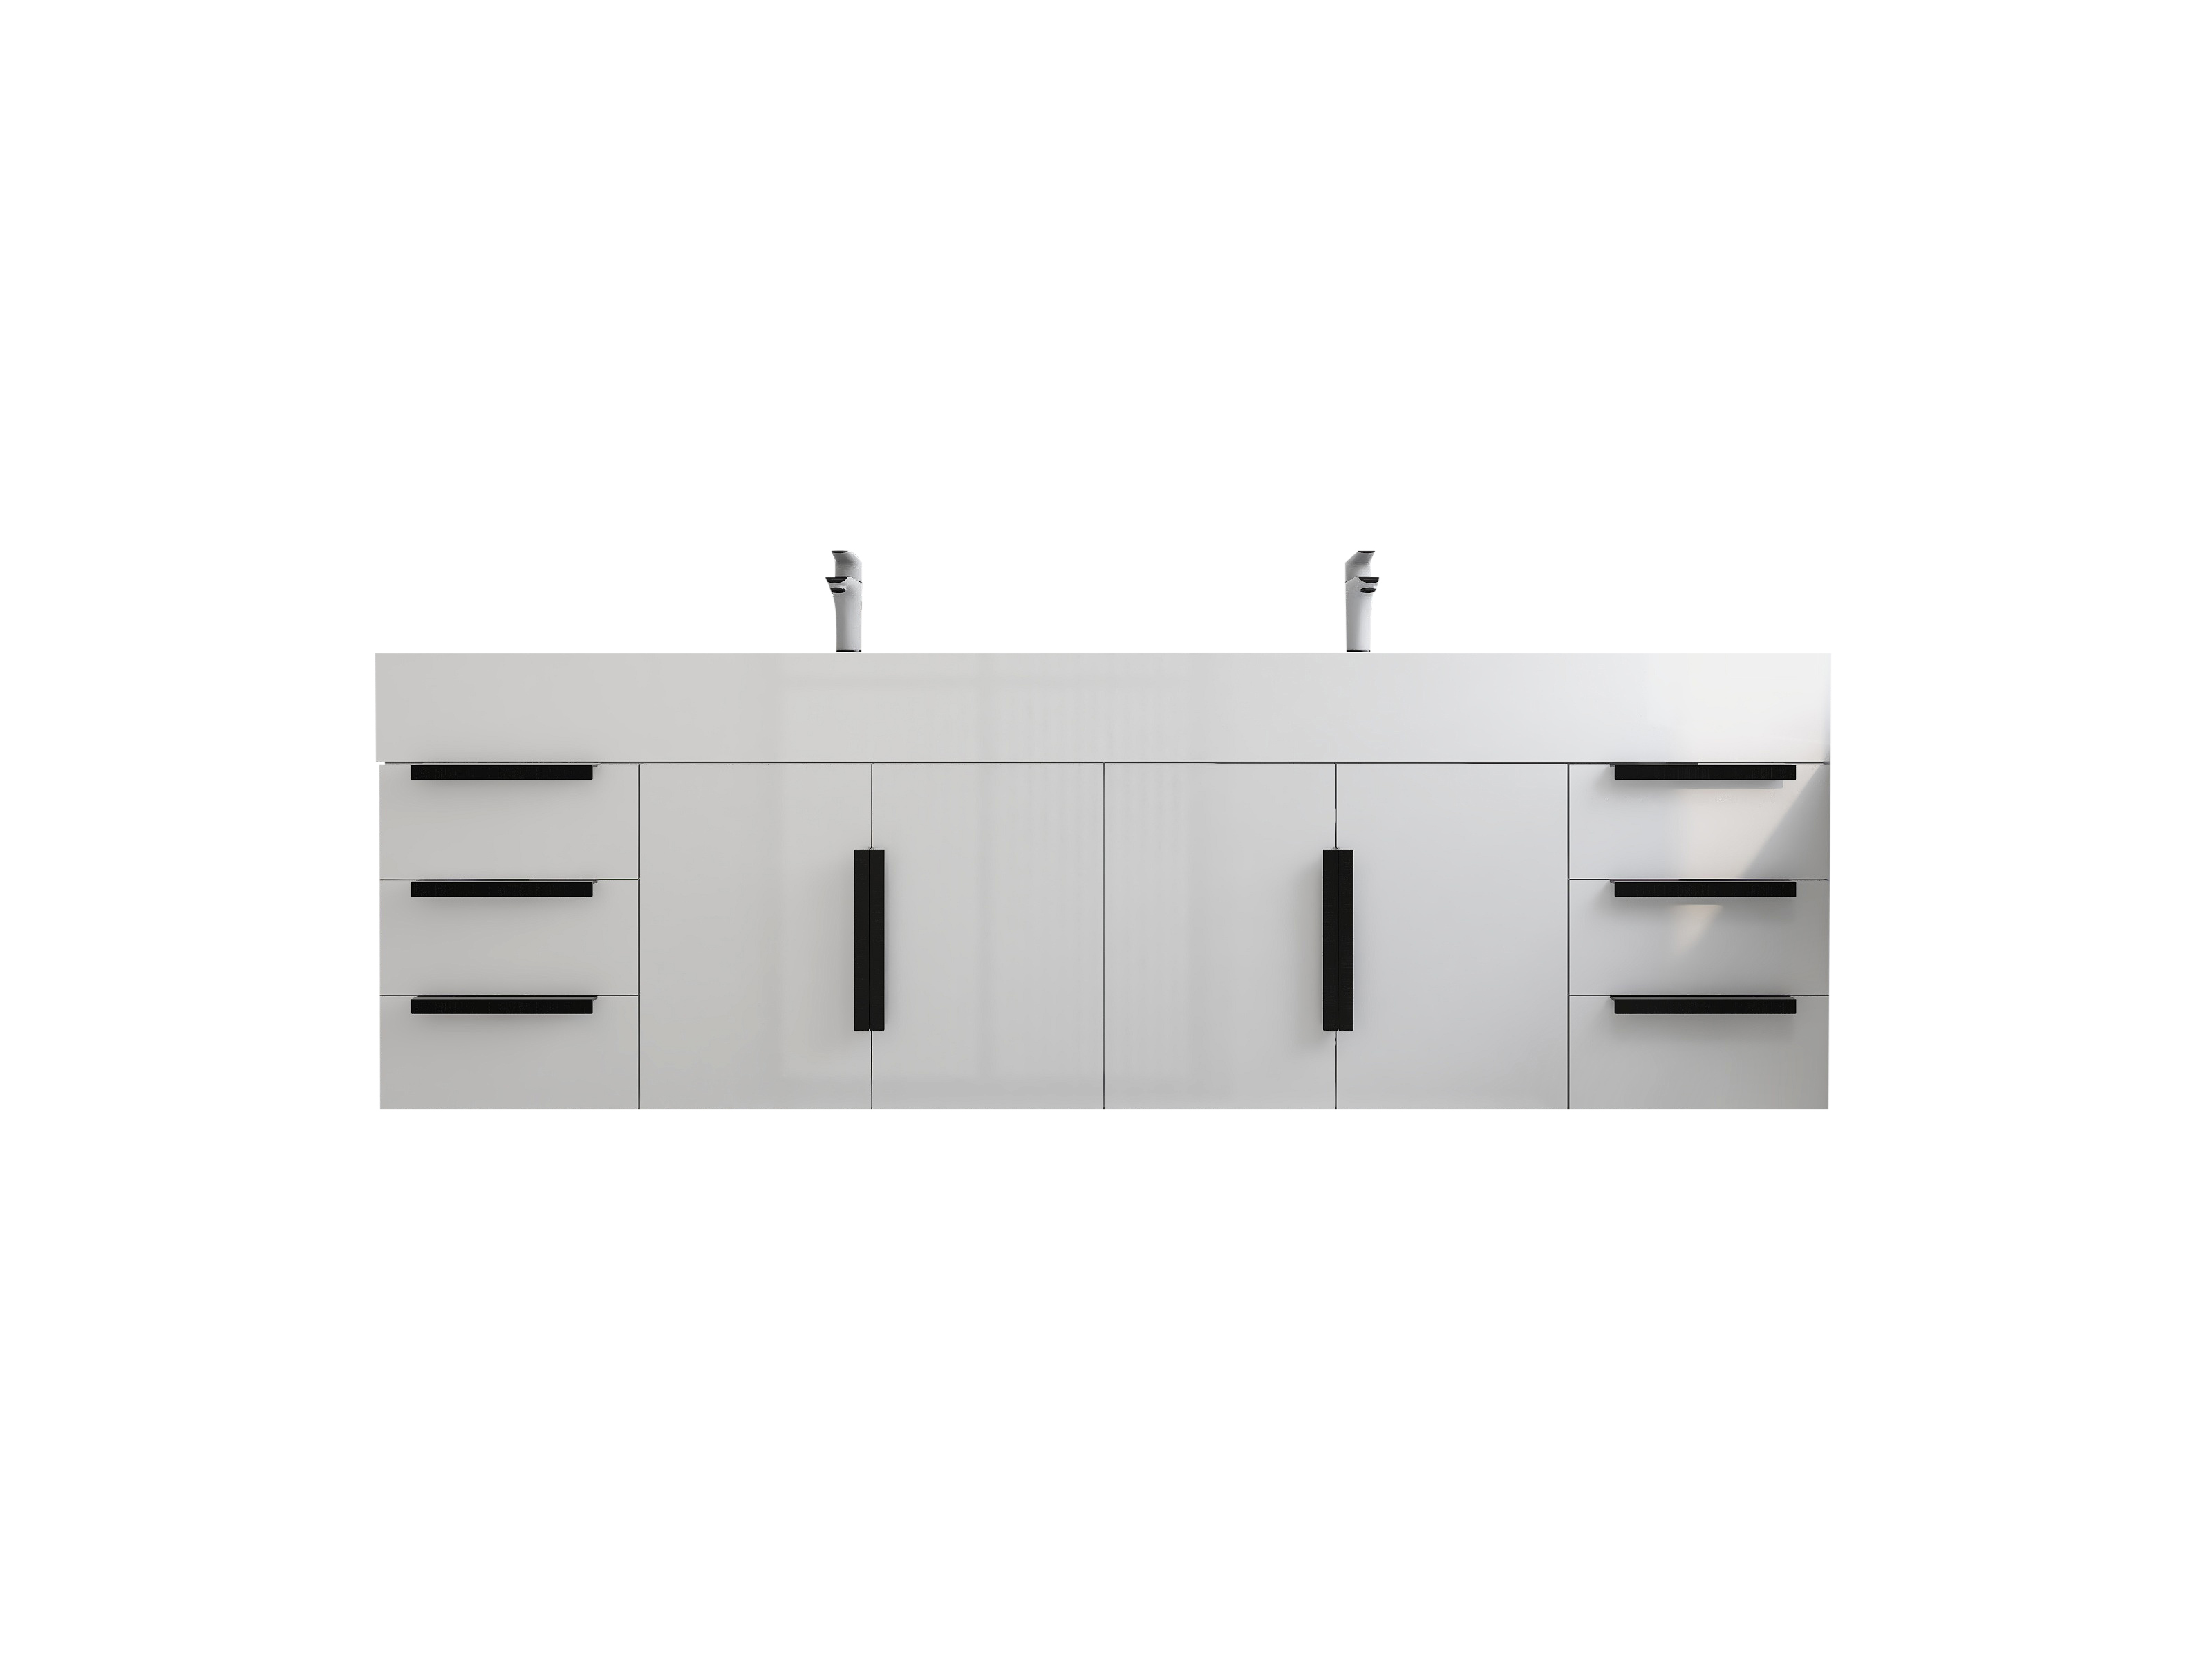 Bethany 72" Wall-Mounted Floating Bathroom Vanity with Reinforced Acrylic Double Sink in Gloss White with Black Handles | Better Vanity Bath Vanities